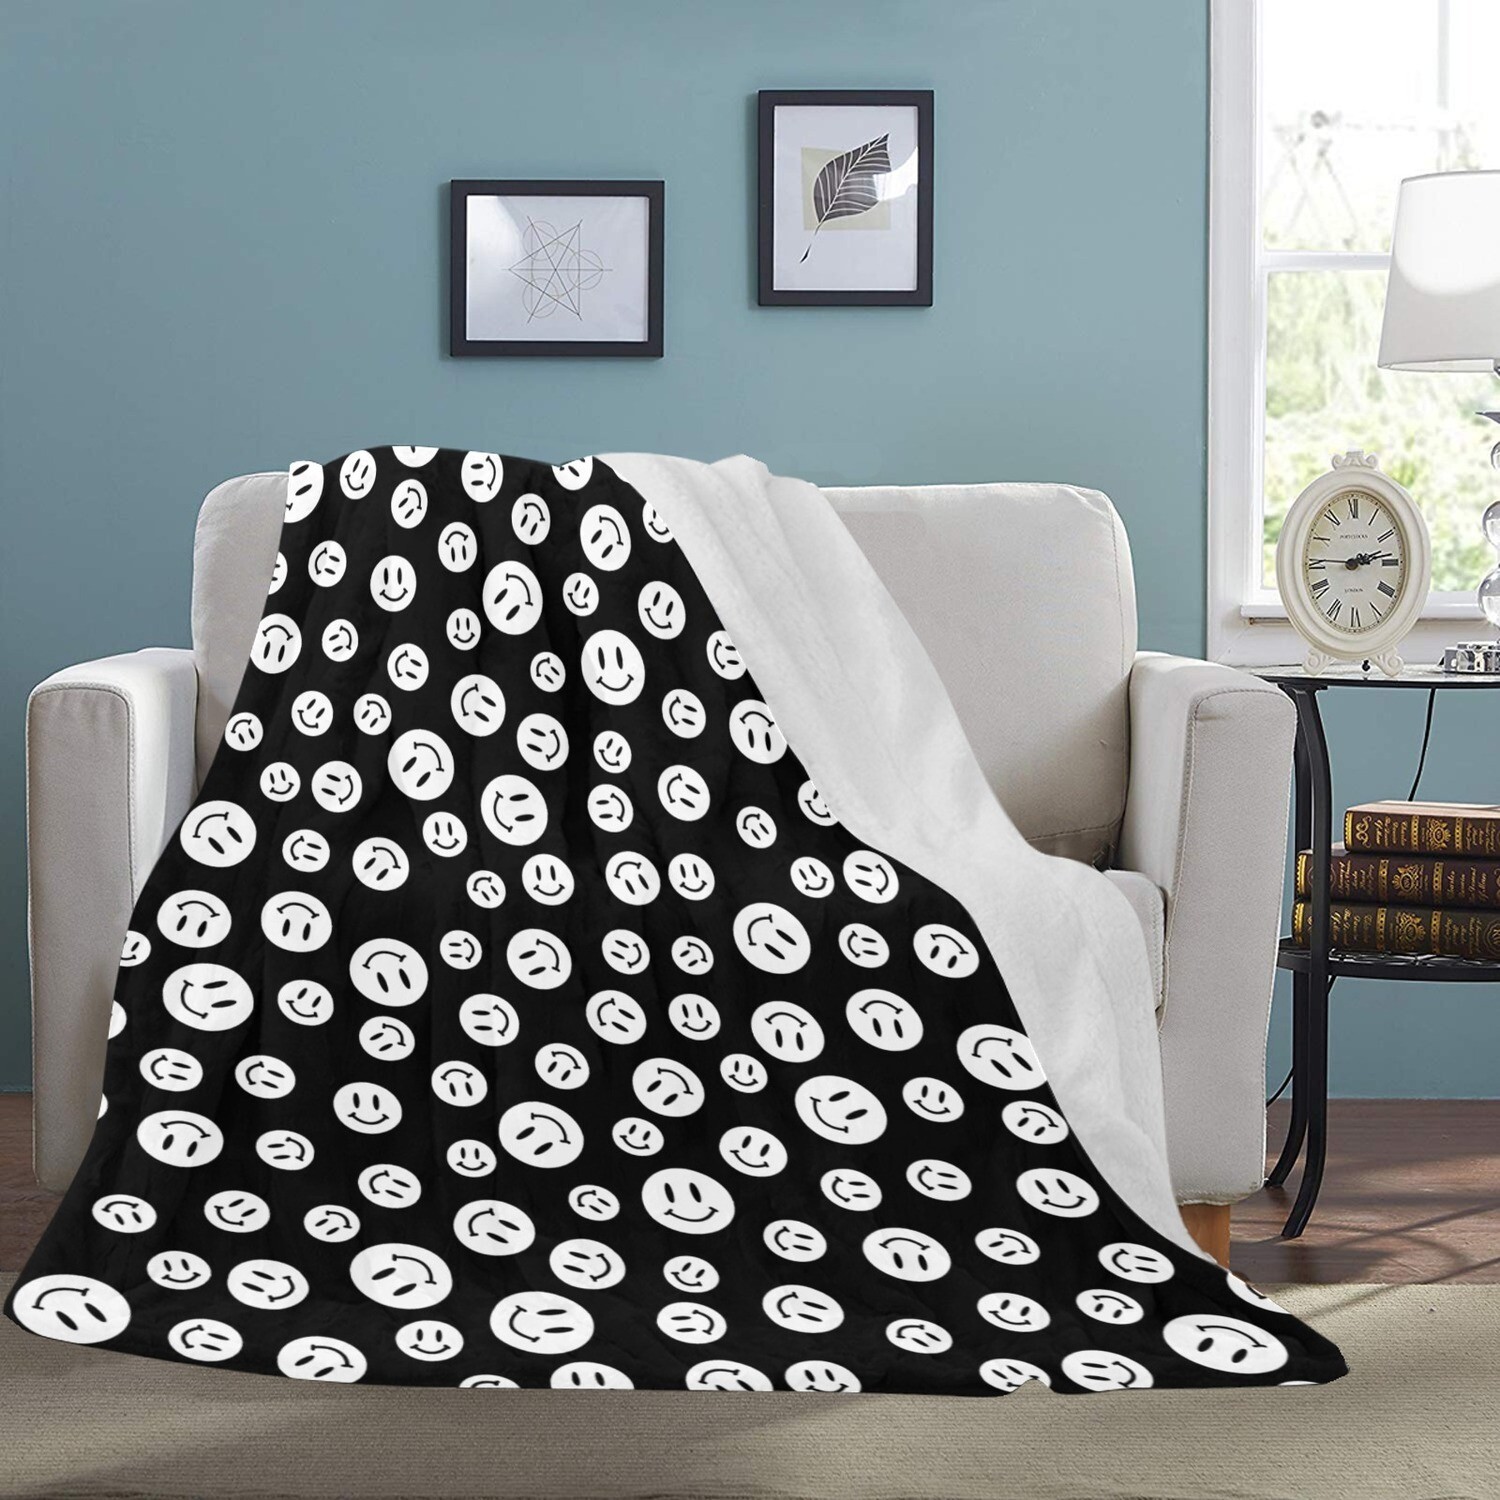 🤴🏽👸🏽😃 Large Ultra-Soft Micro Fleece Blanket Happy faces, Smileys, Emojis, gift, gift for her, gift for him, gift for them, 70"x80", black & white